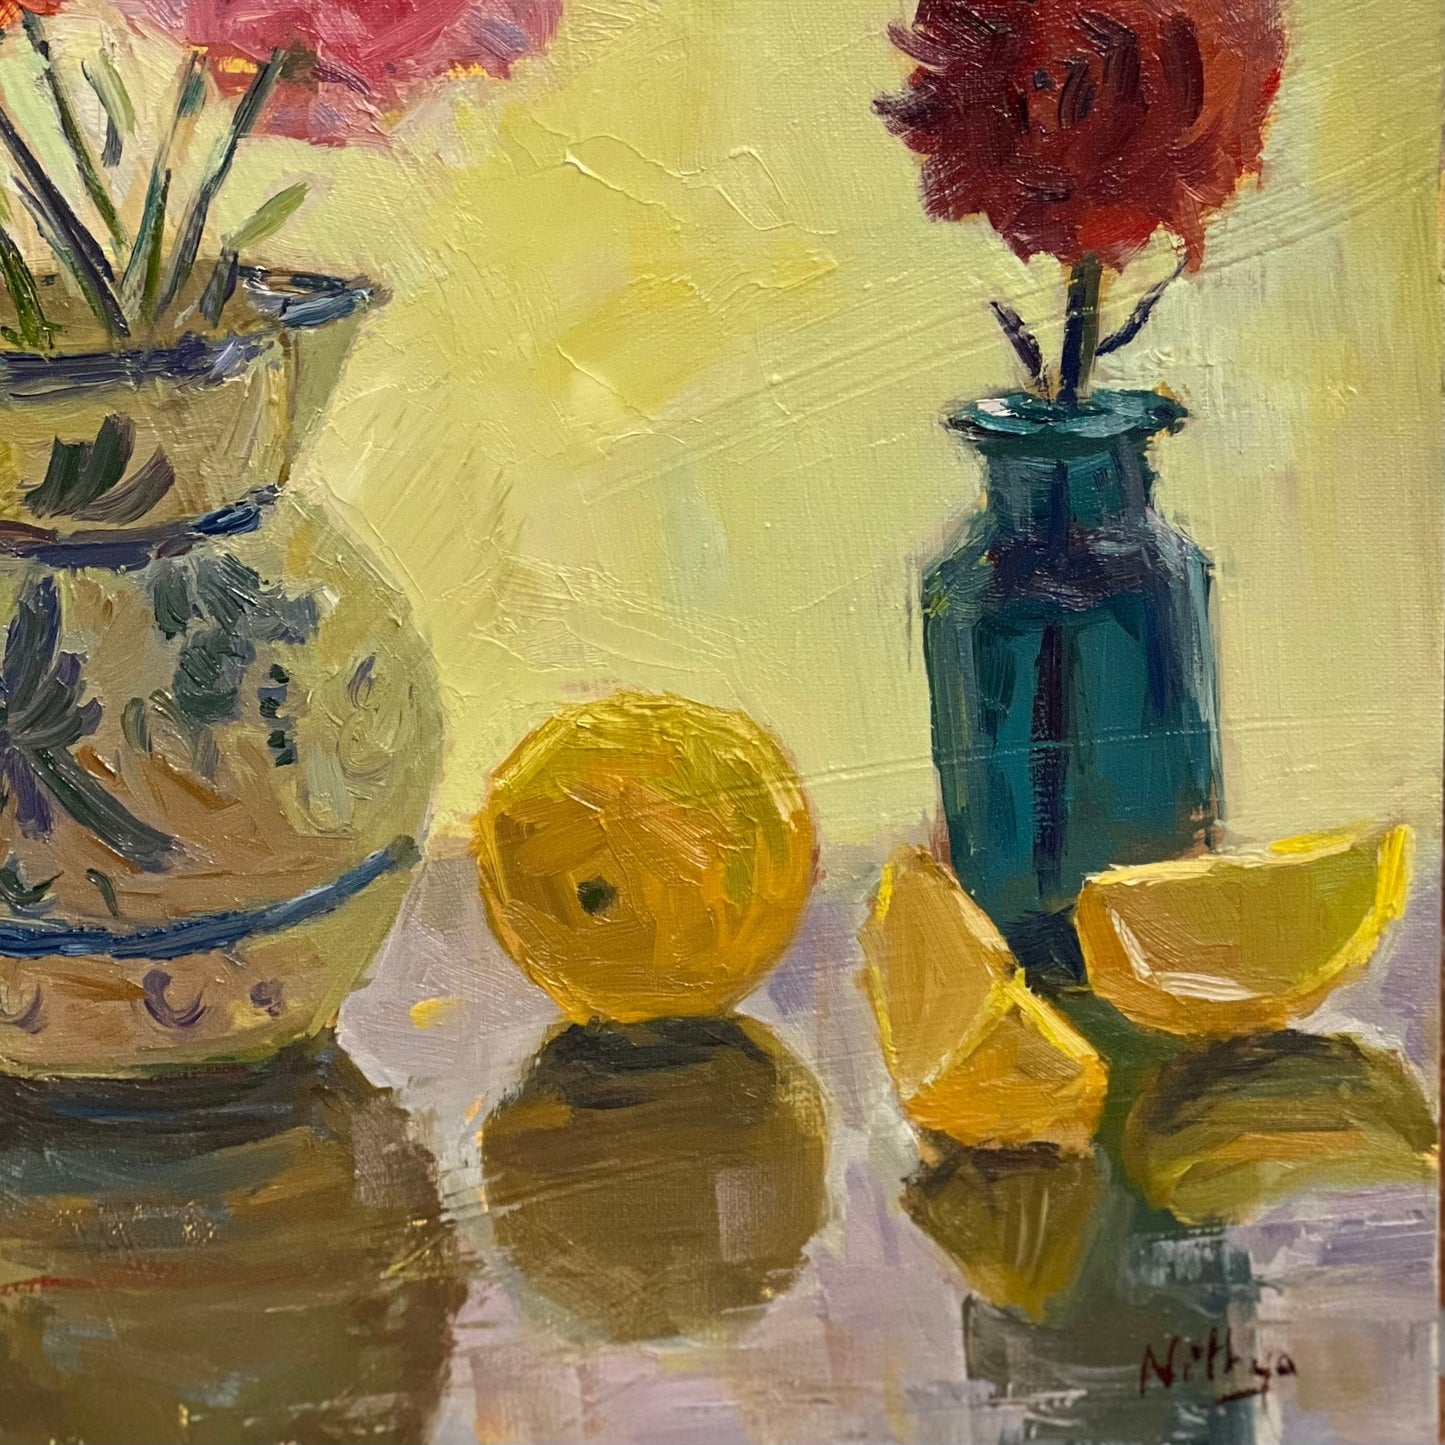 Flowers against the light with lemons and reflections - still life oil painting